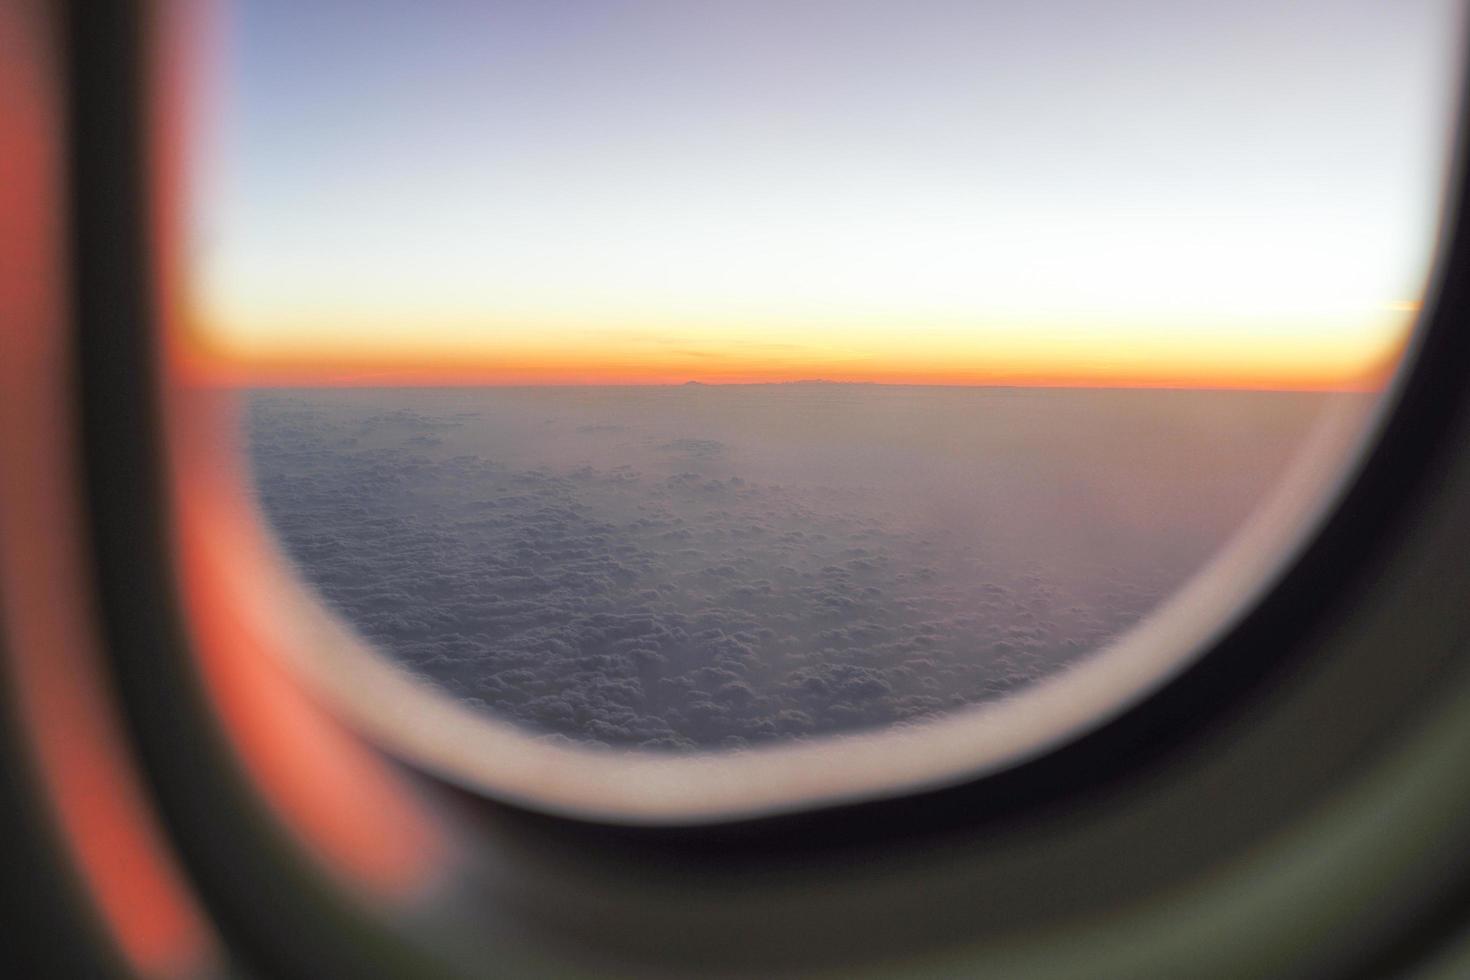 Light of sunset on the horizon with blue sky background and shadow from an aircraft window in the foreground photo